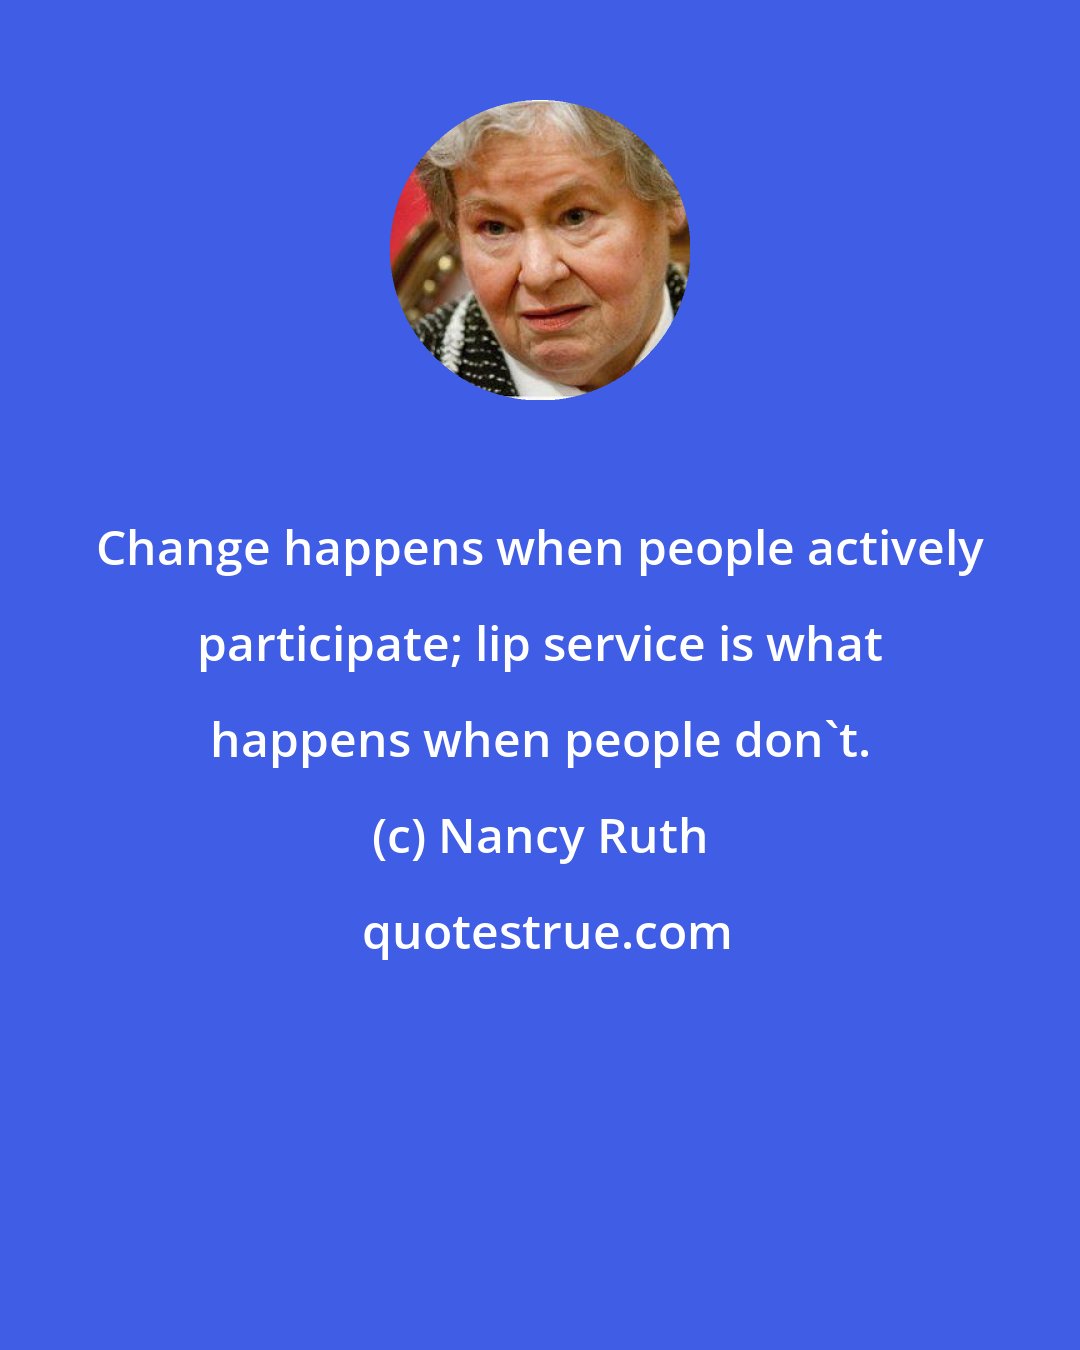 Nancy Ruth: Change happens when people actively participate; lip service is what happens when people don't.